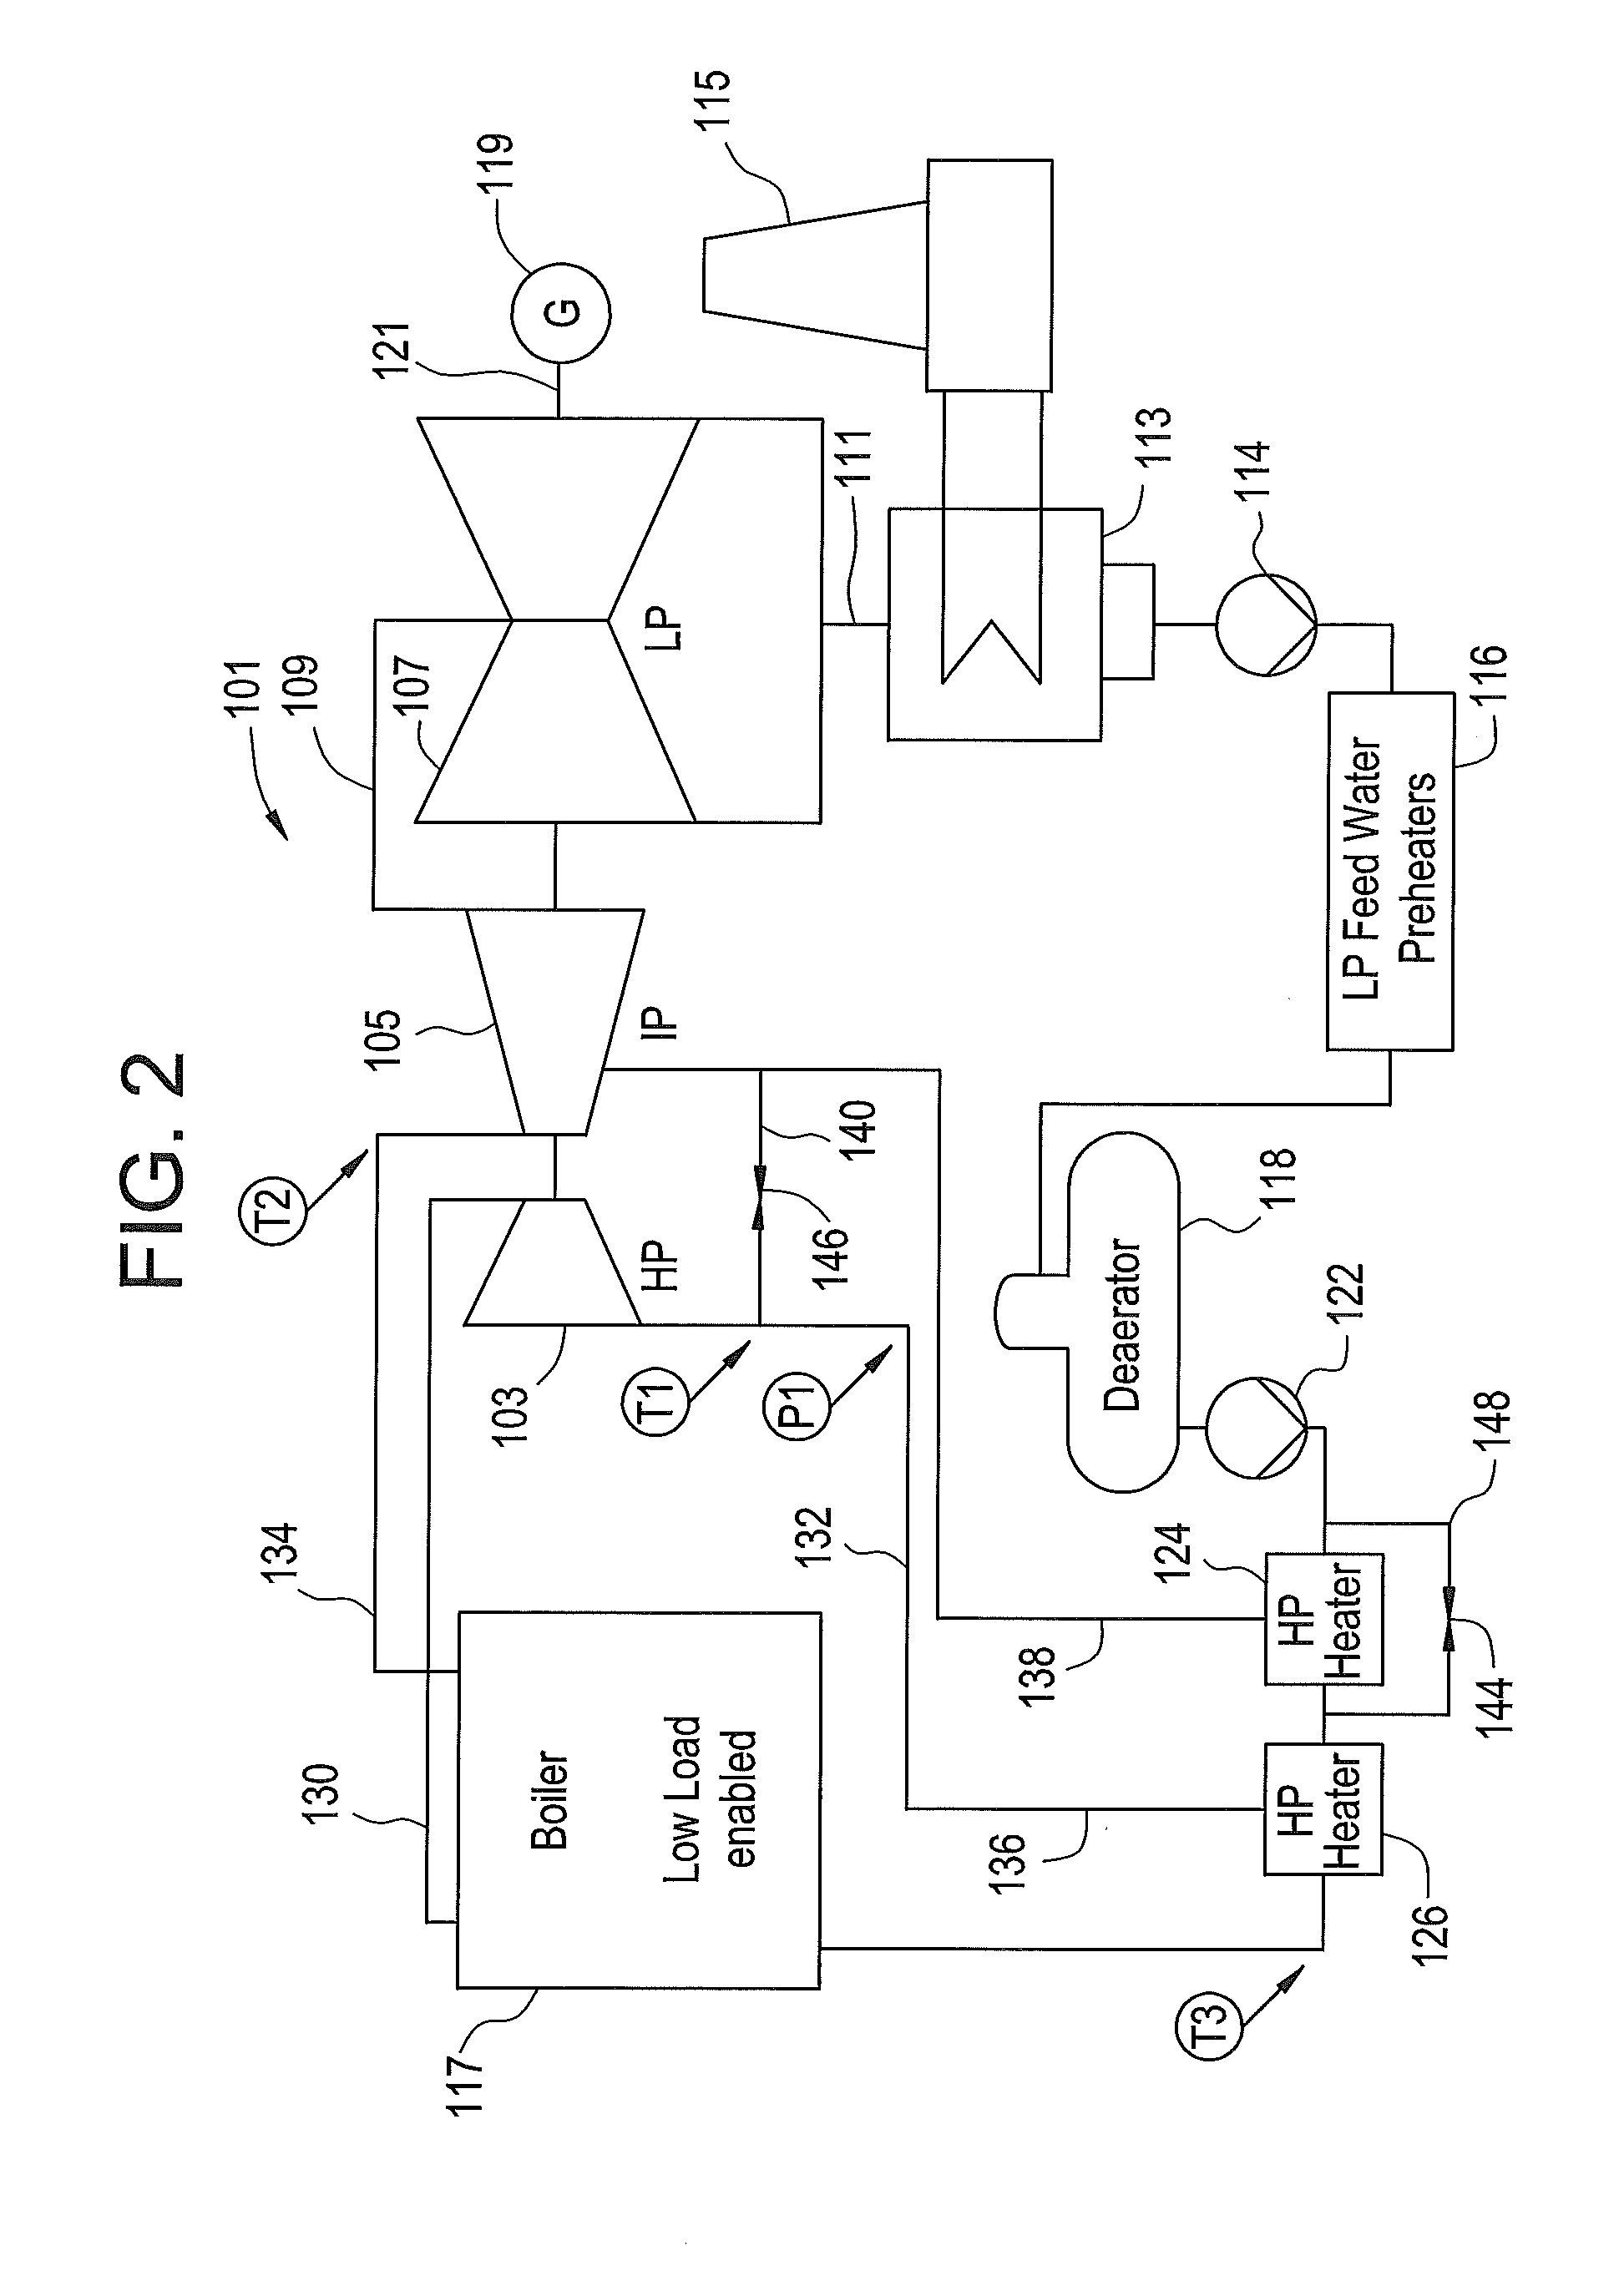 Steam power plant turbine and control method for operating at low load